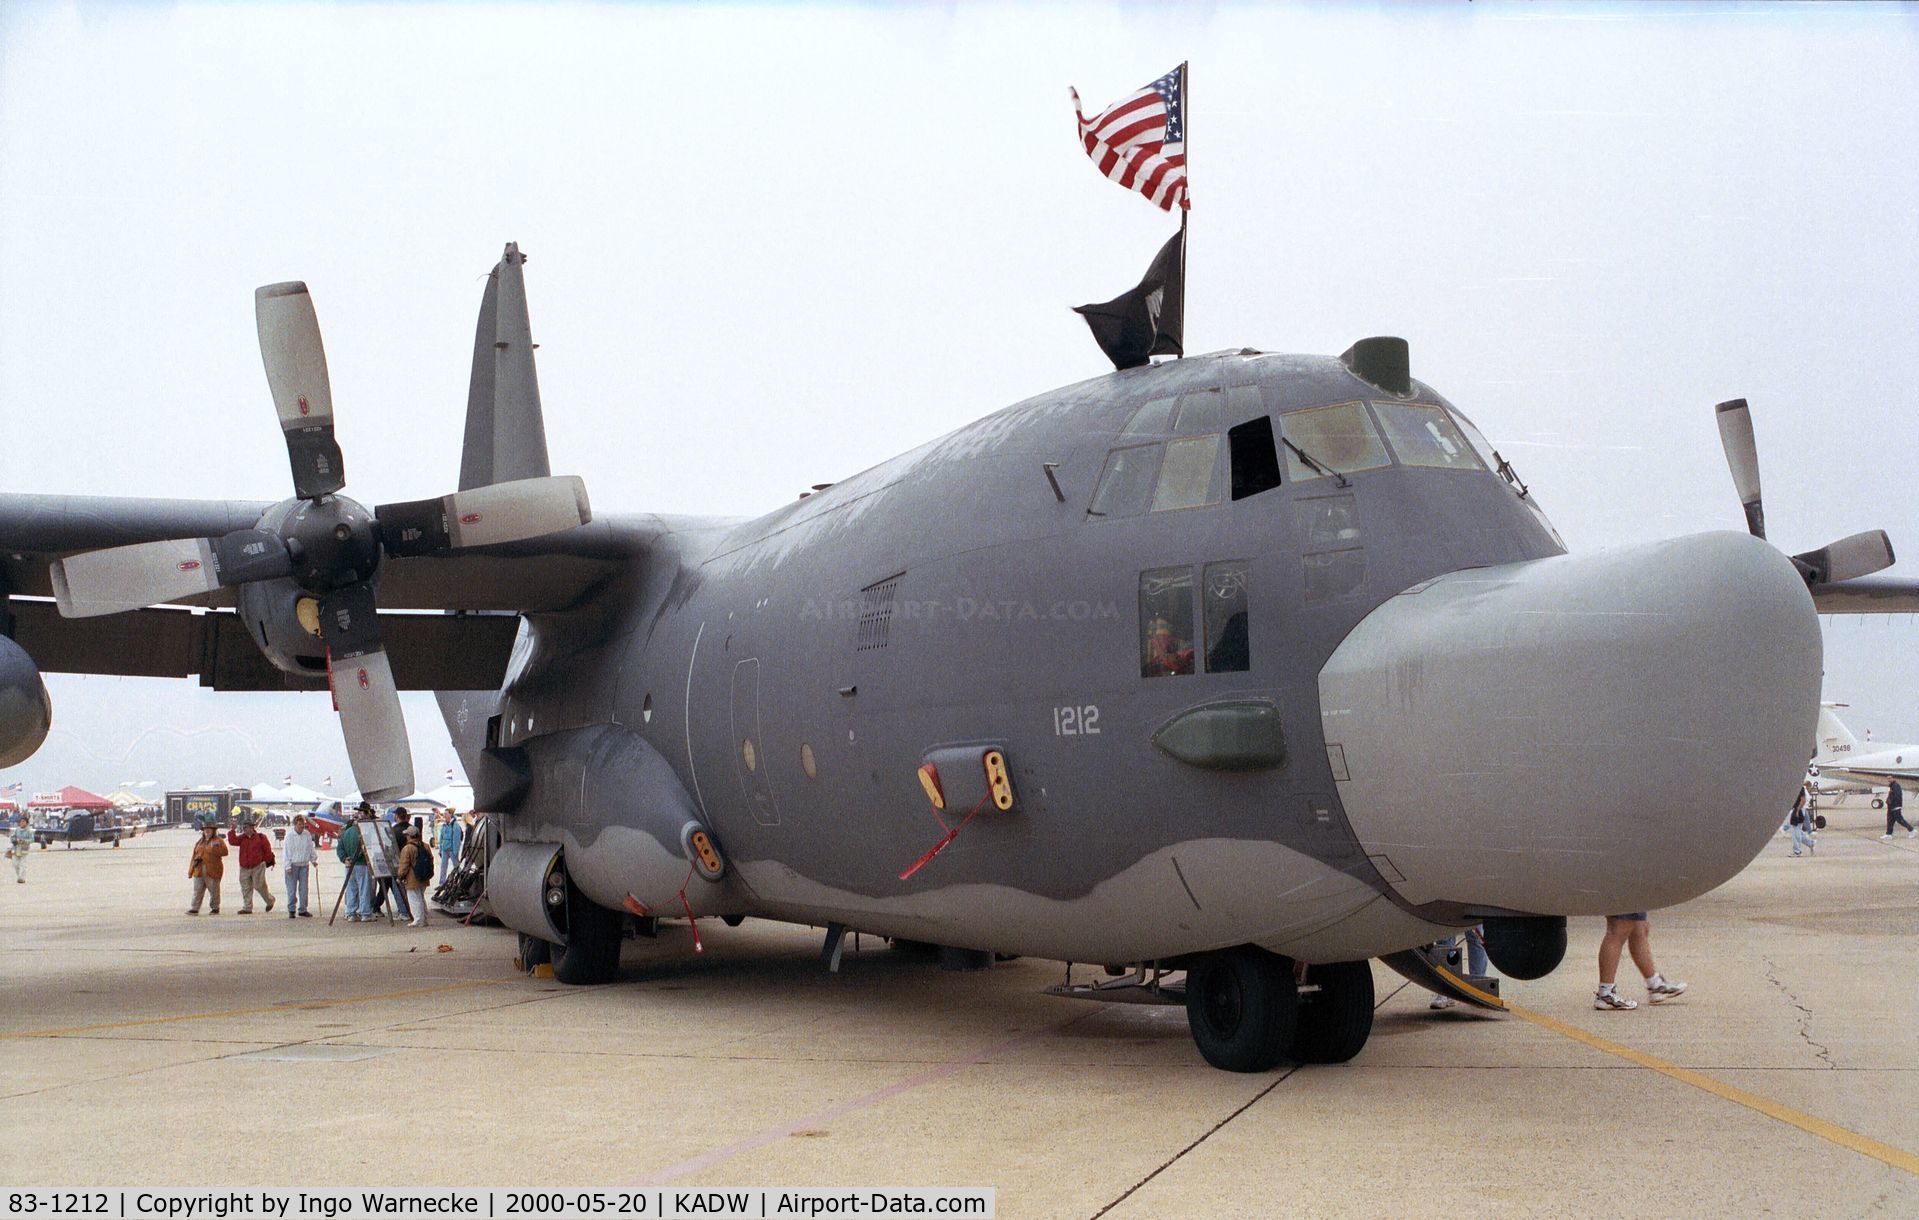 83-1212, Lockheed MC-130H Combat Talon II C/N 382-5004, Lockheed MC-130H Hercules of the USAF at Andrews AFB during Armed Forces Day